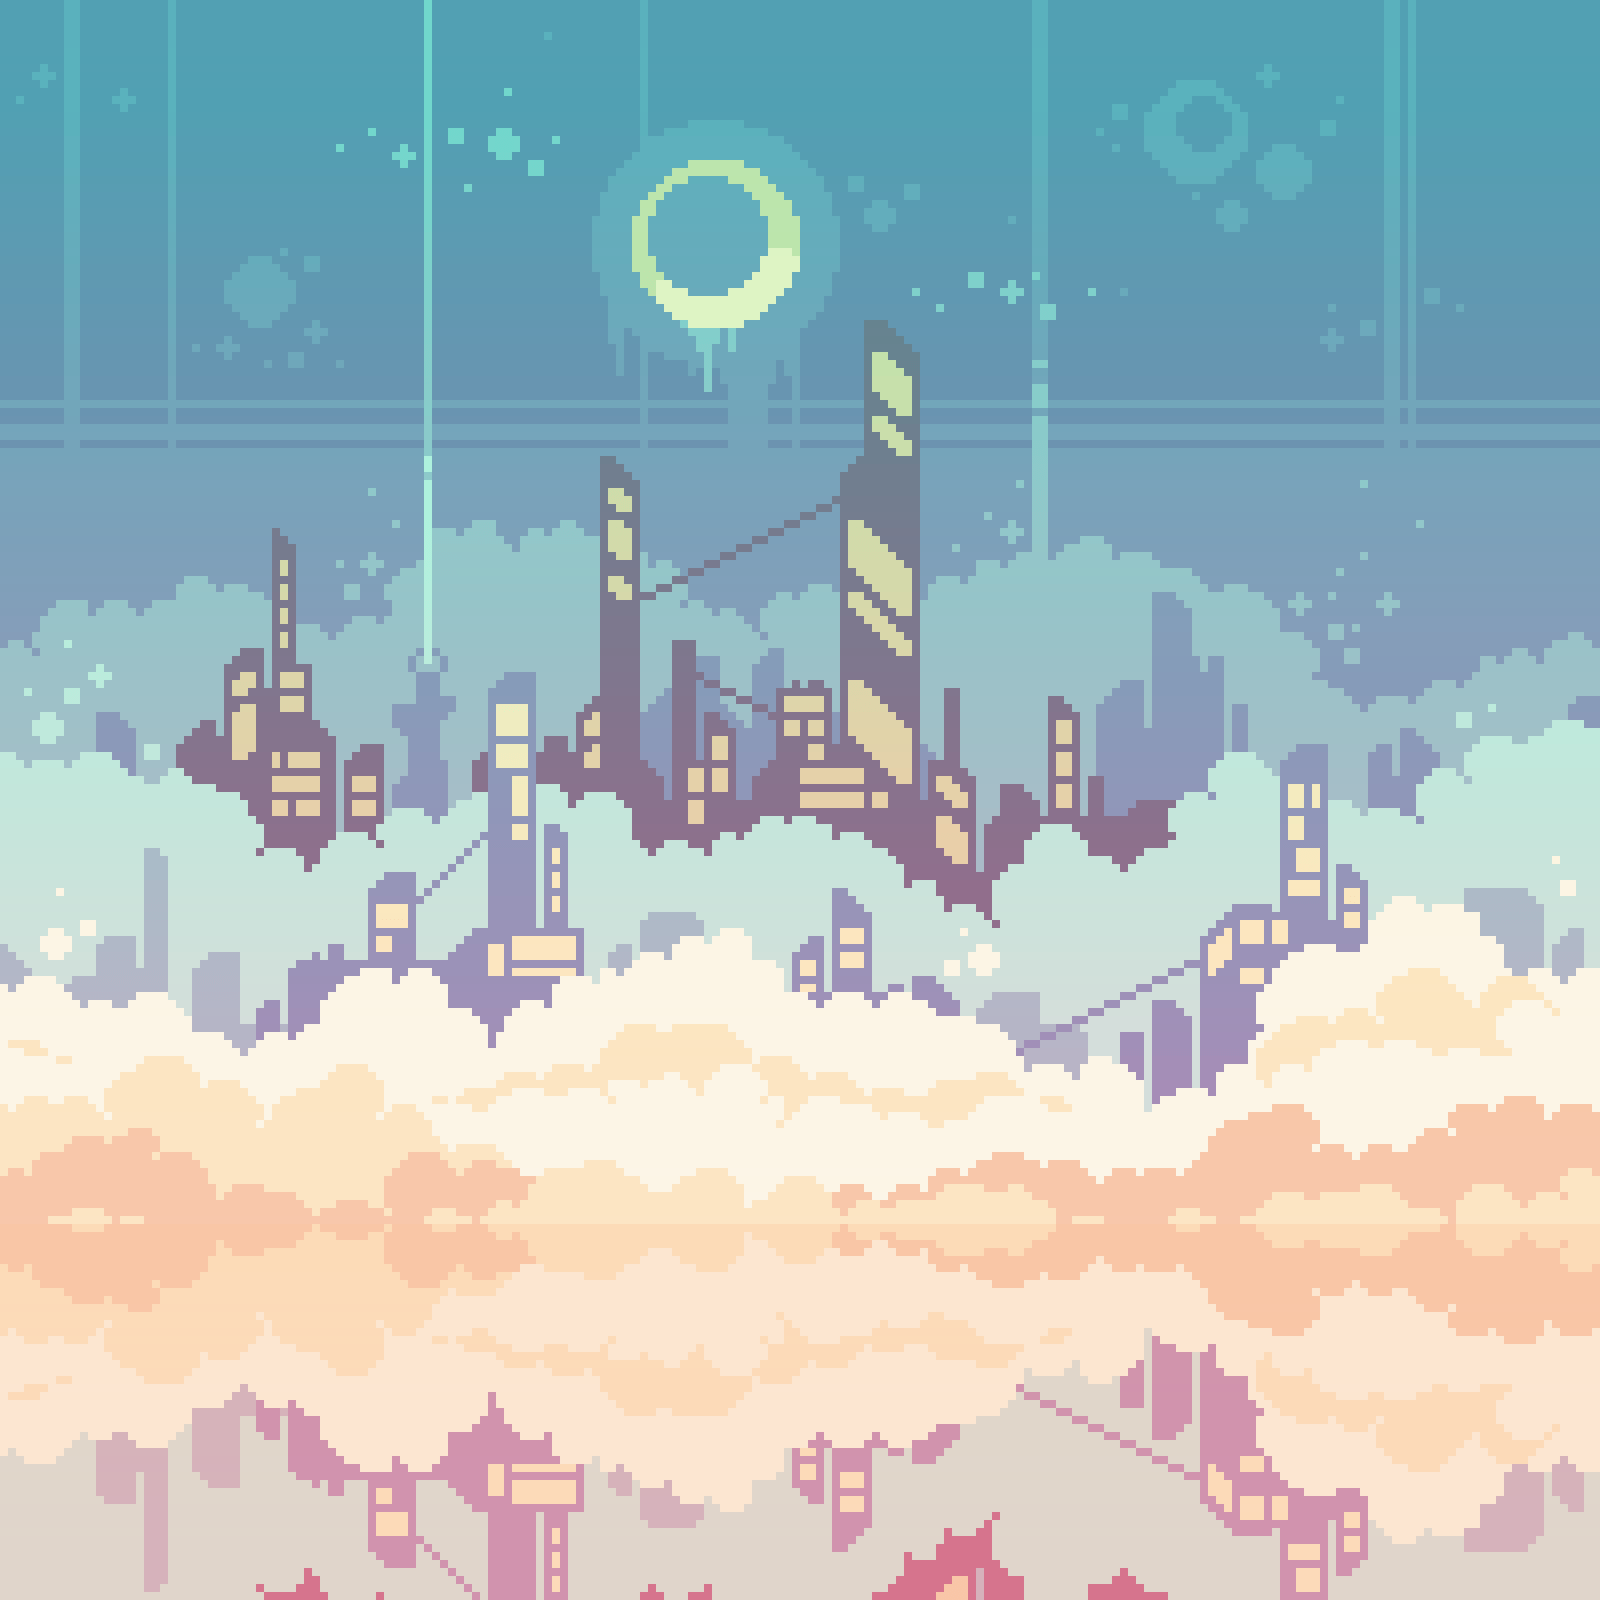 A city with buildings and clouds in the background - Pixel art